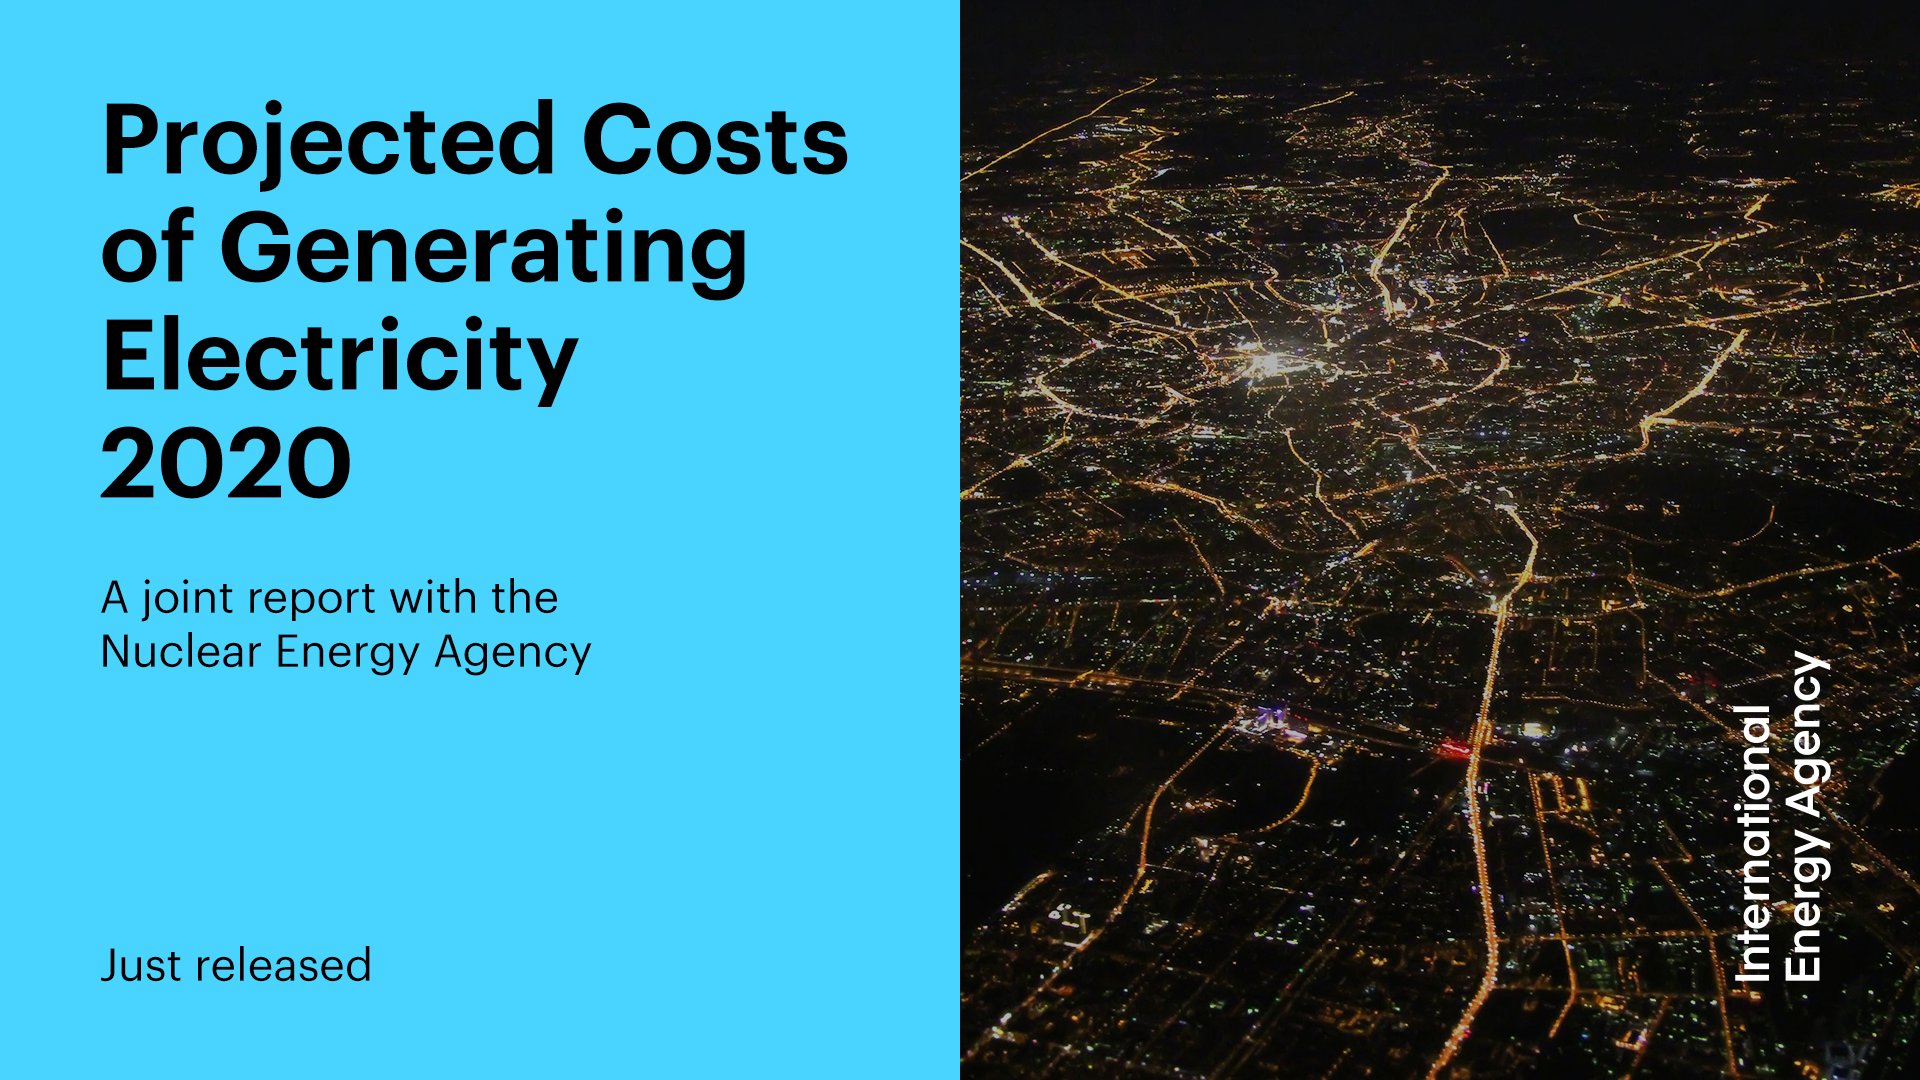 International Energy Agency on Twitter: "The electricity is essential for modern societies &amp; has a crucial role to play in reducing 🌍 Our joint report with @OECD_NEA explores the costs